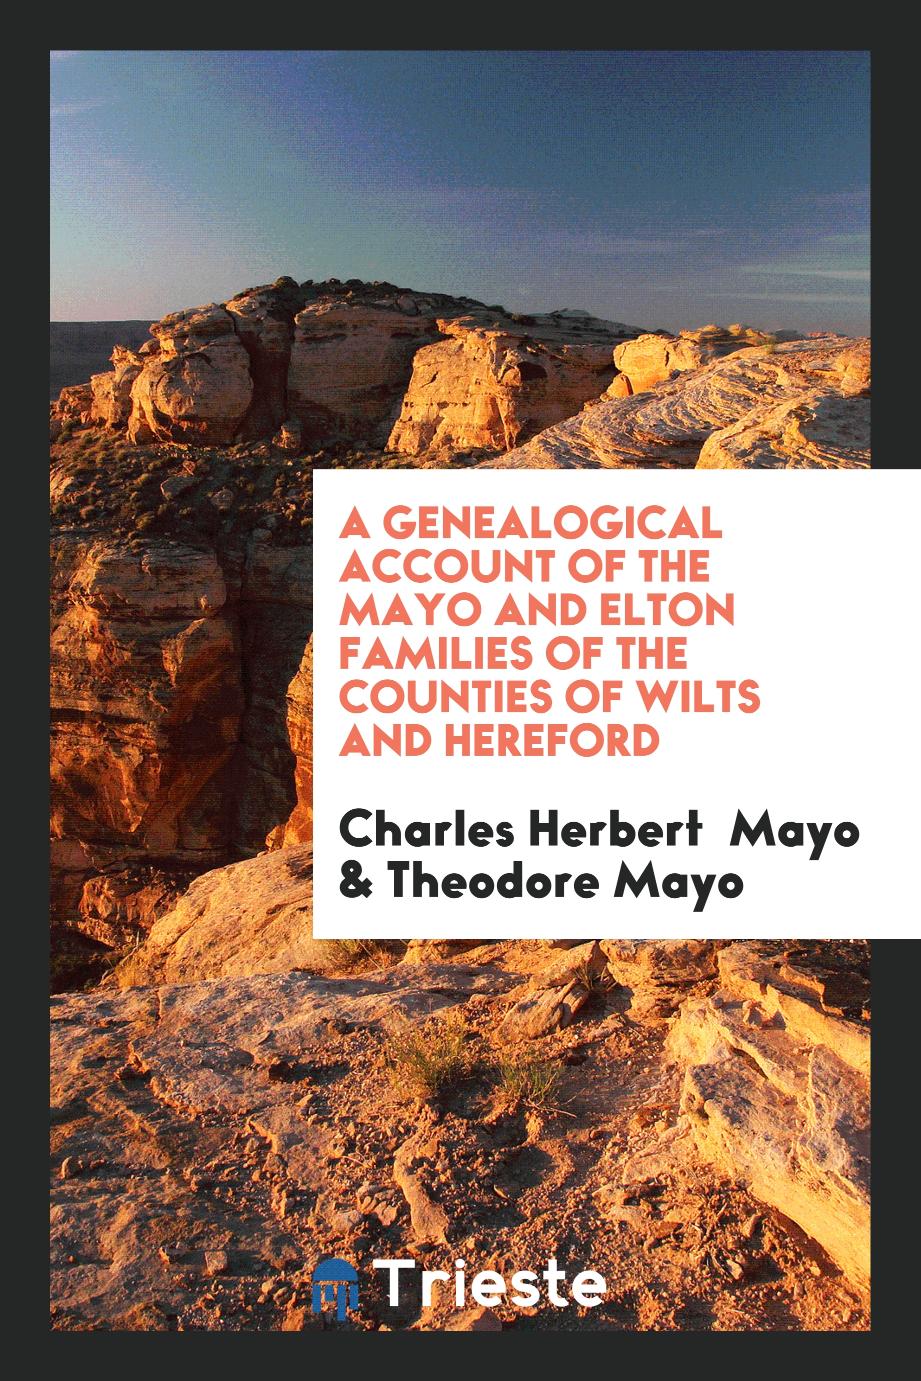 A Genealogical Account of the Mayo and Elton Families of the Counties of Wilts and Hereford